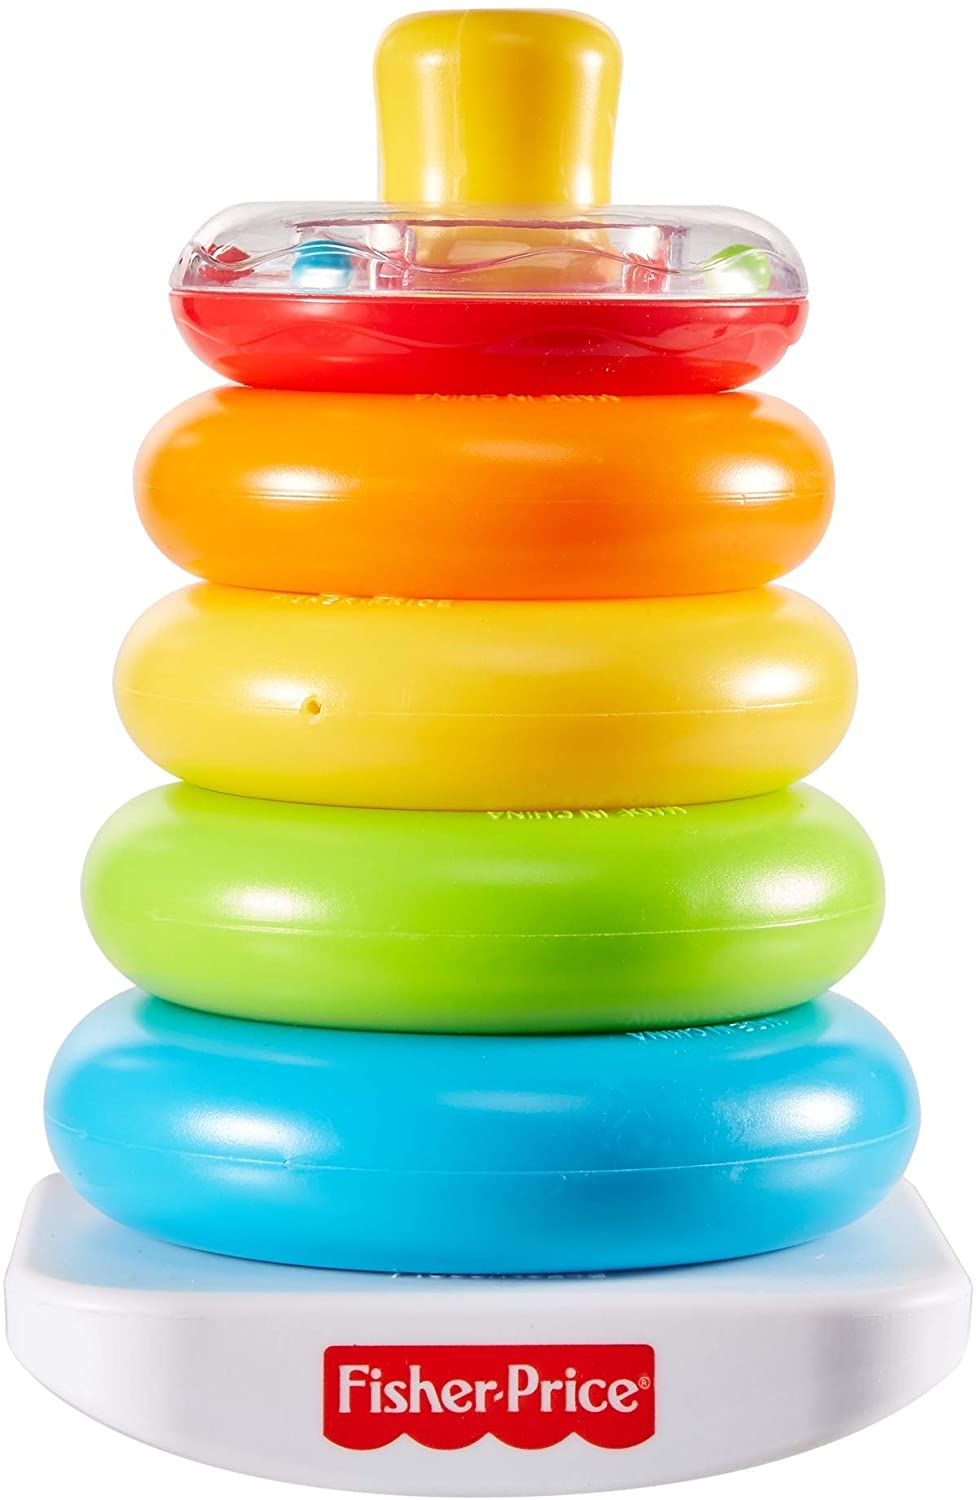 Fisher-Price Rock-a-Stack Classic stacking toy with 5 colorful rings to grasp, shake, and stack (Plastic Materials)